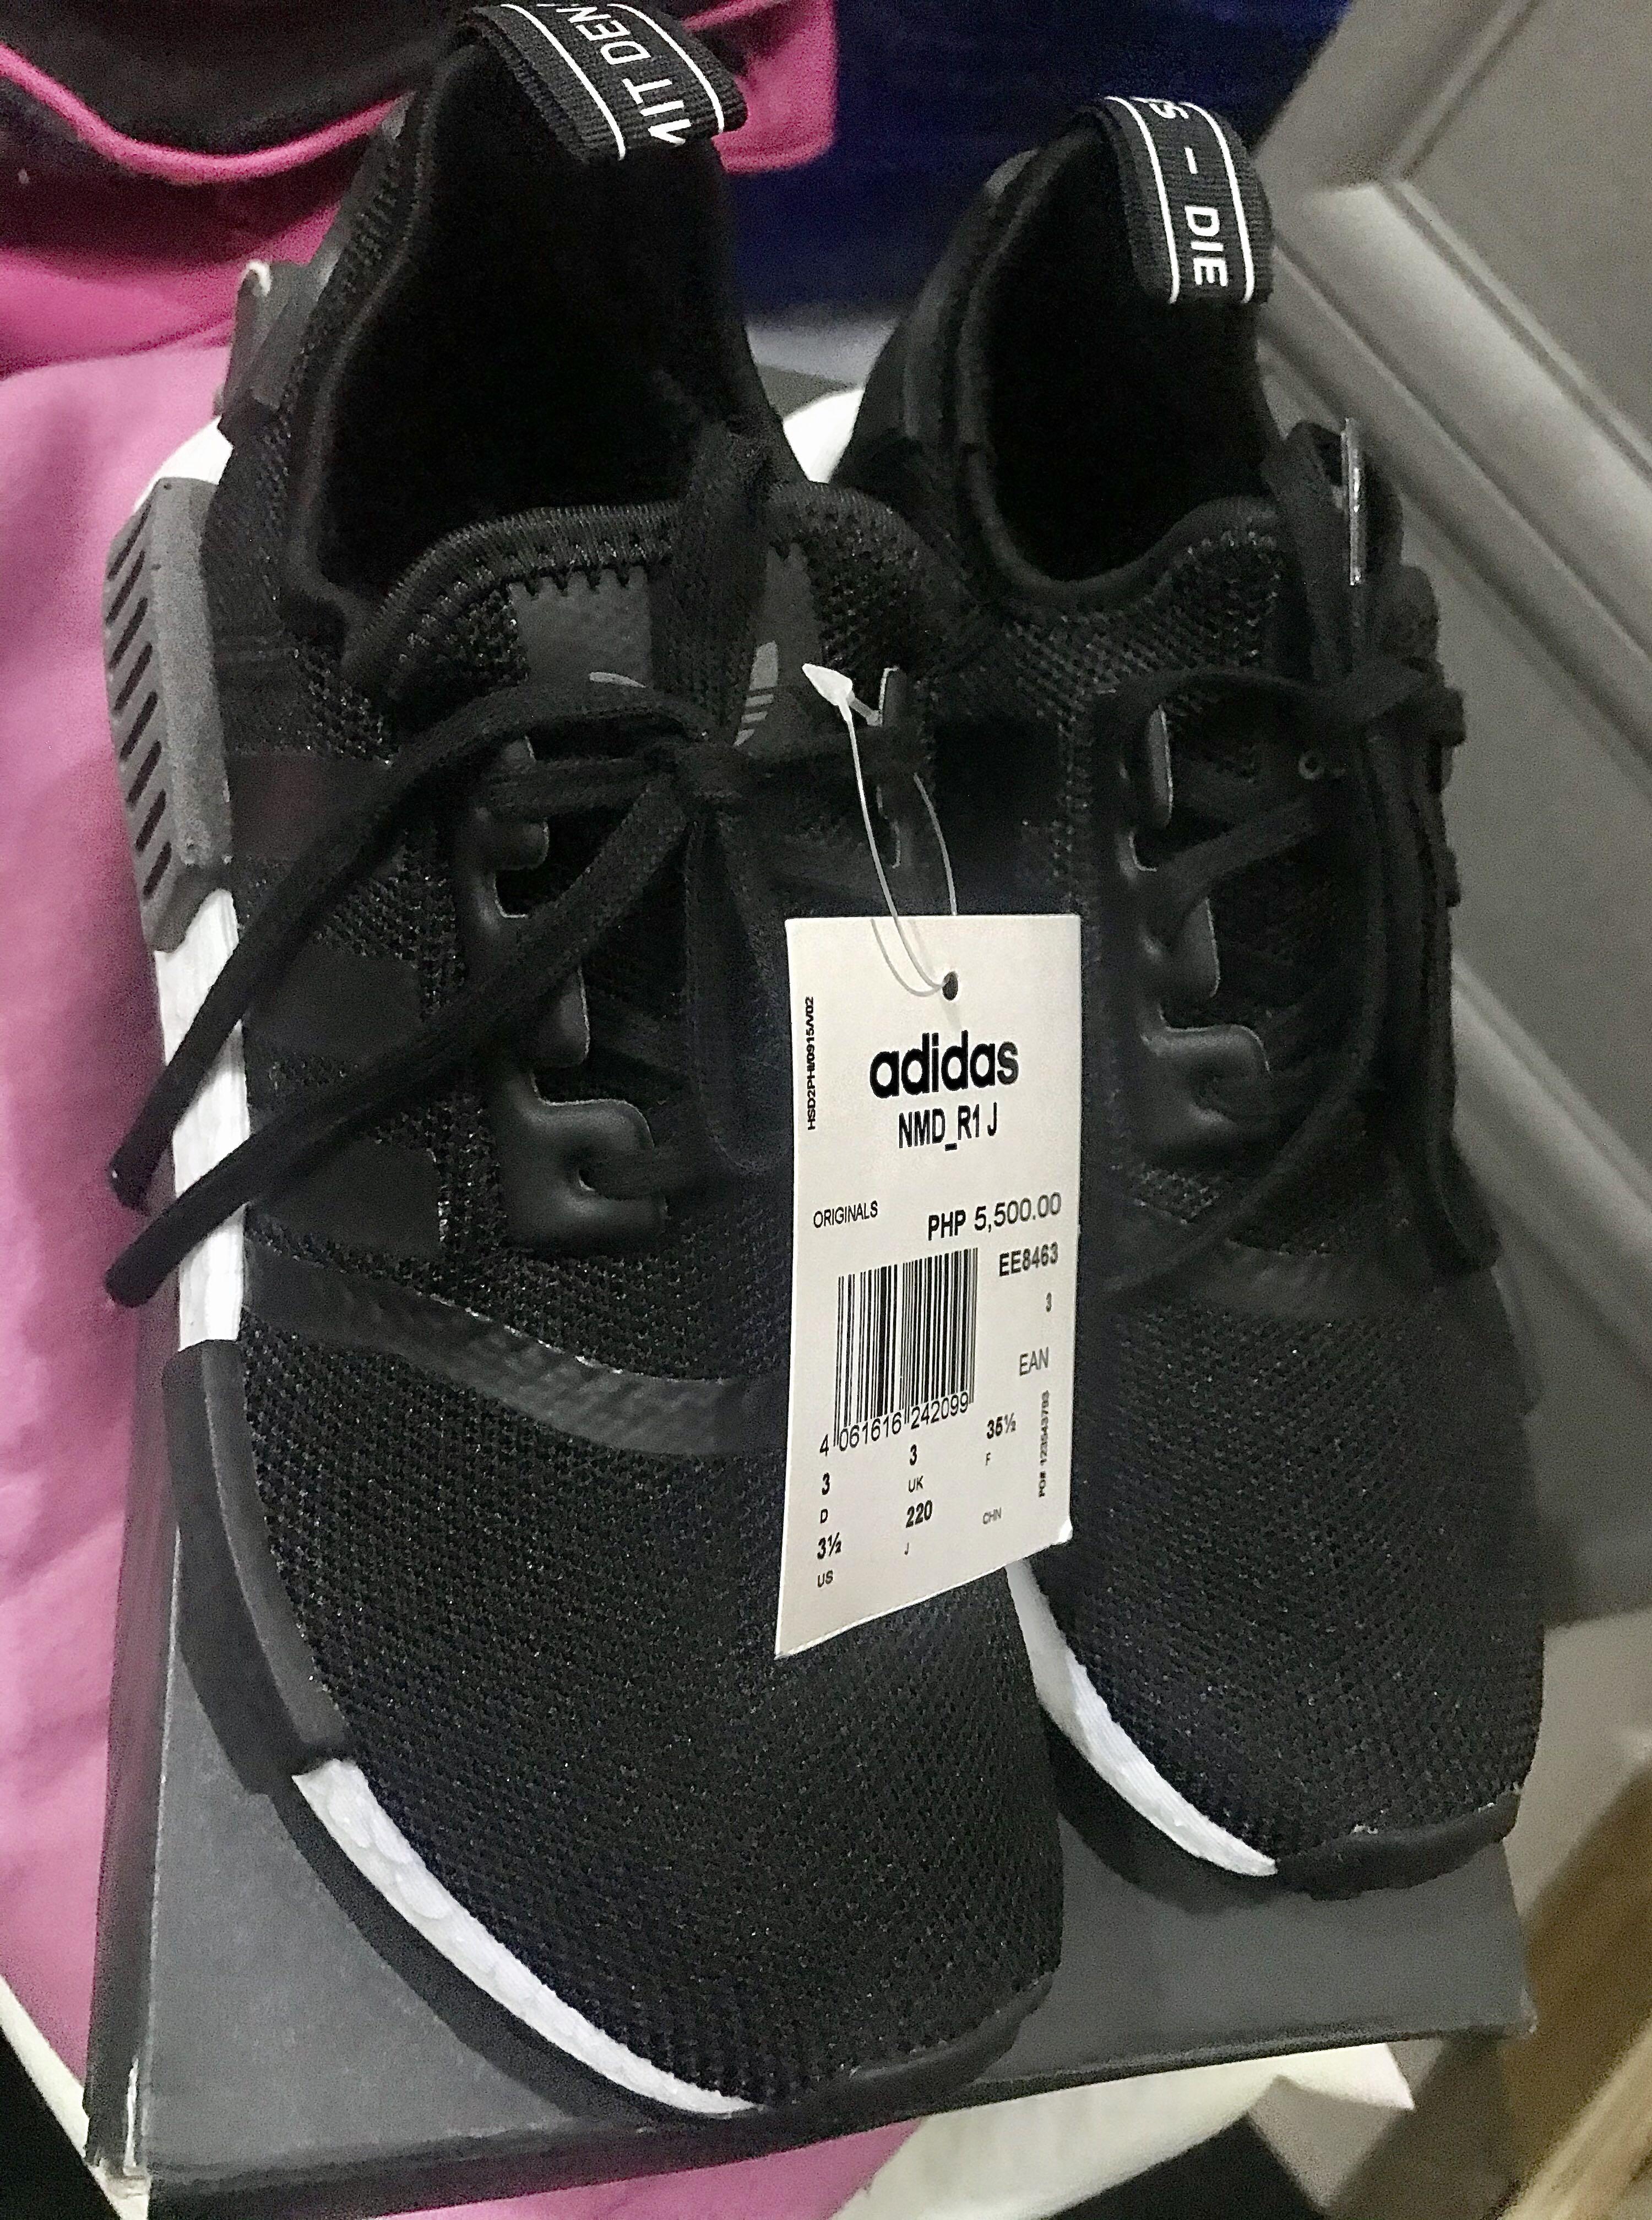 ADIDAS NMD Black/Grey, Women's Fashion, Shoes, Sneakers on Carousell